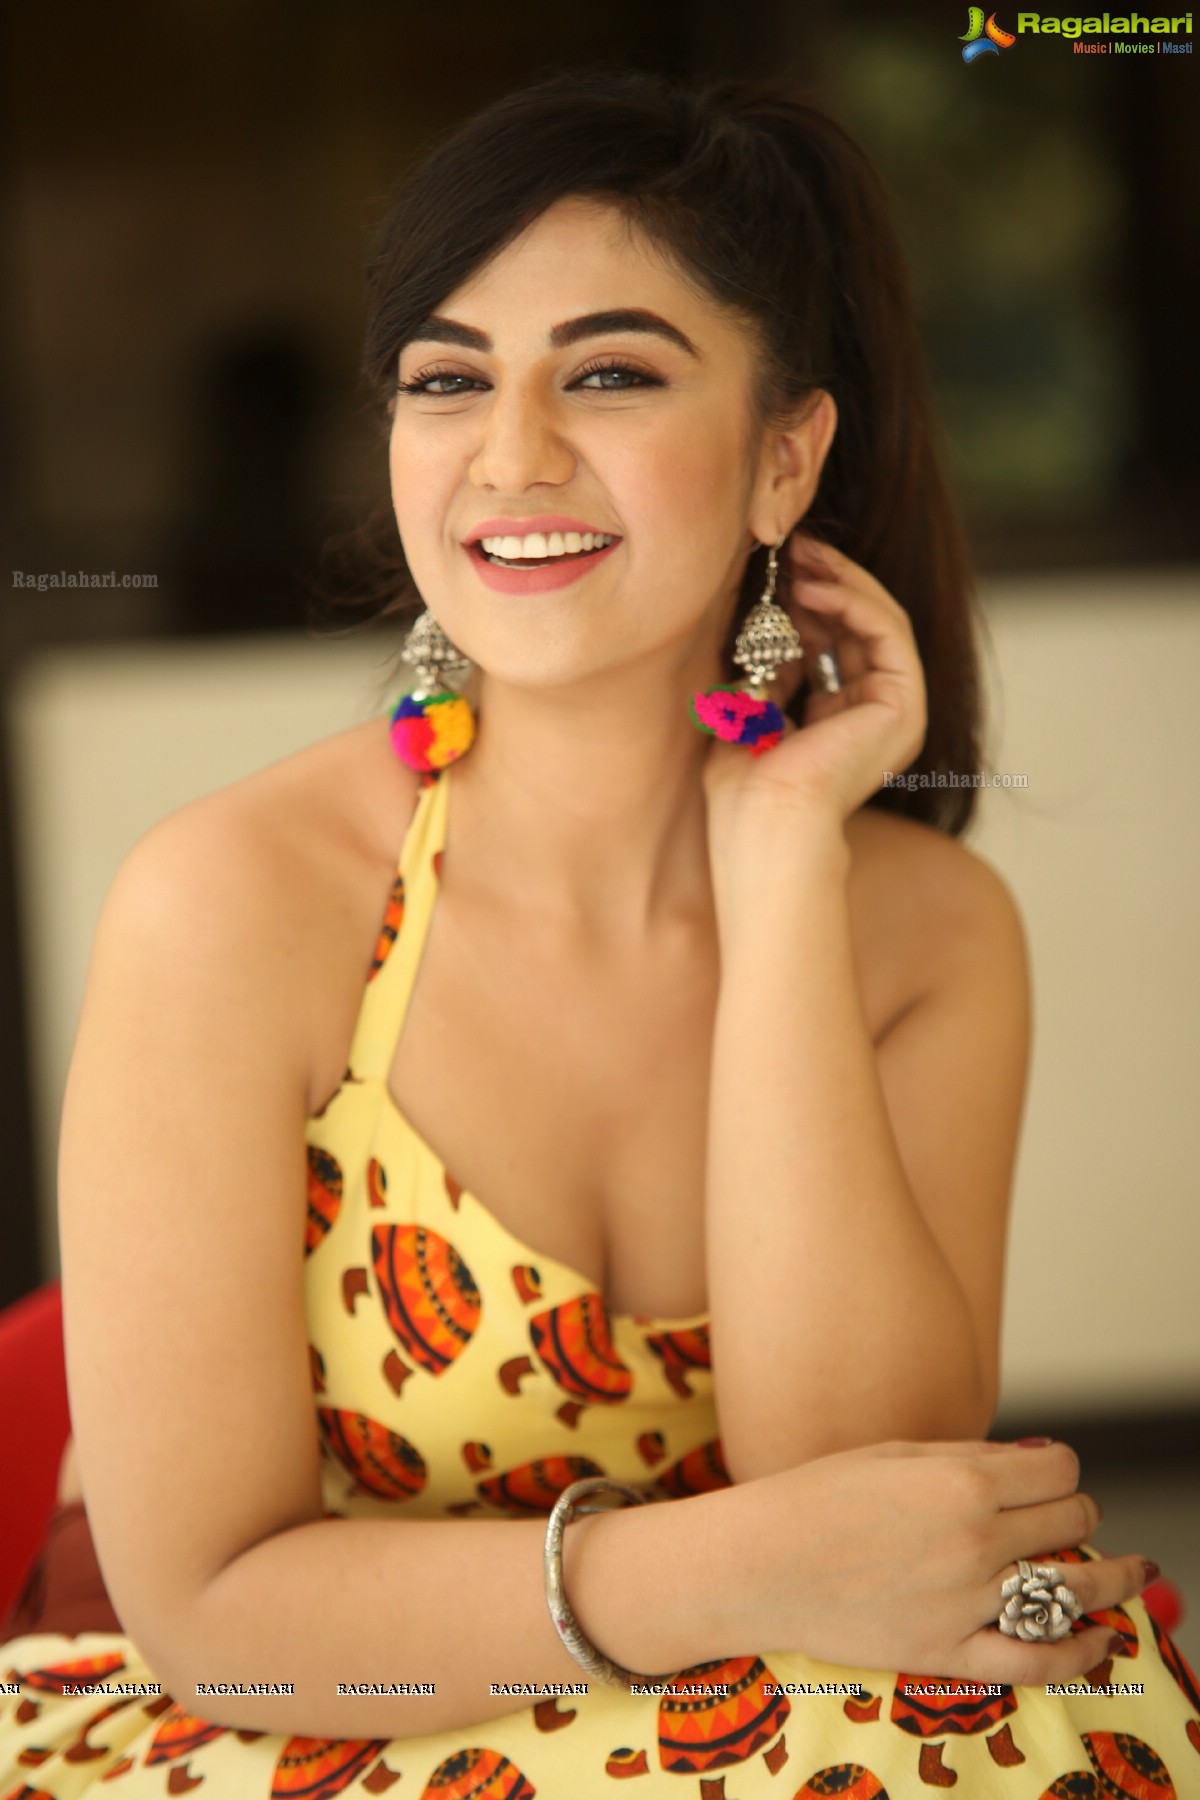 Harshitha Panwar in Yellow and Brown Printed Crop Top and Long Skirt, Photo Gallery